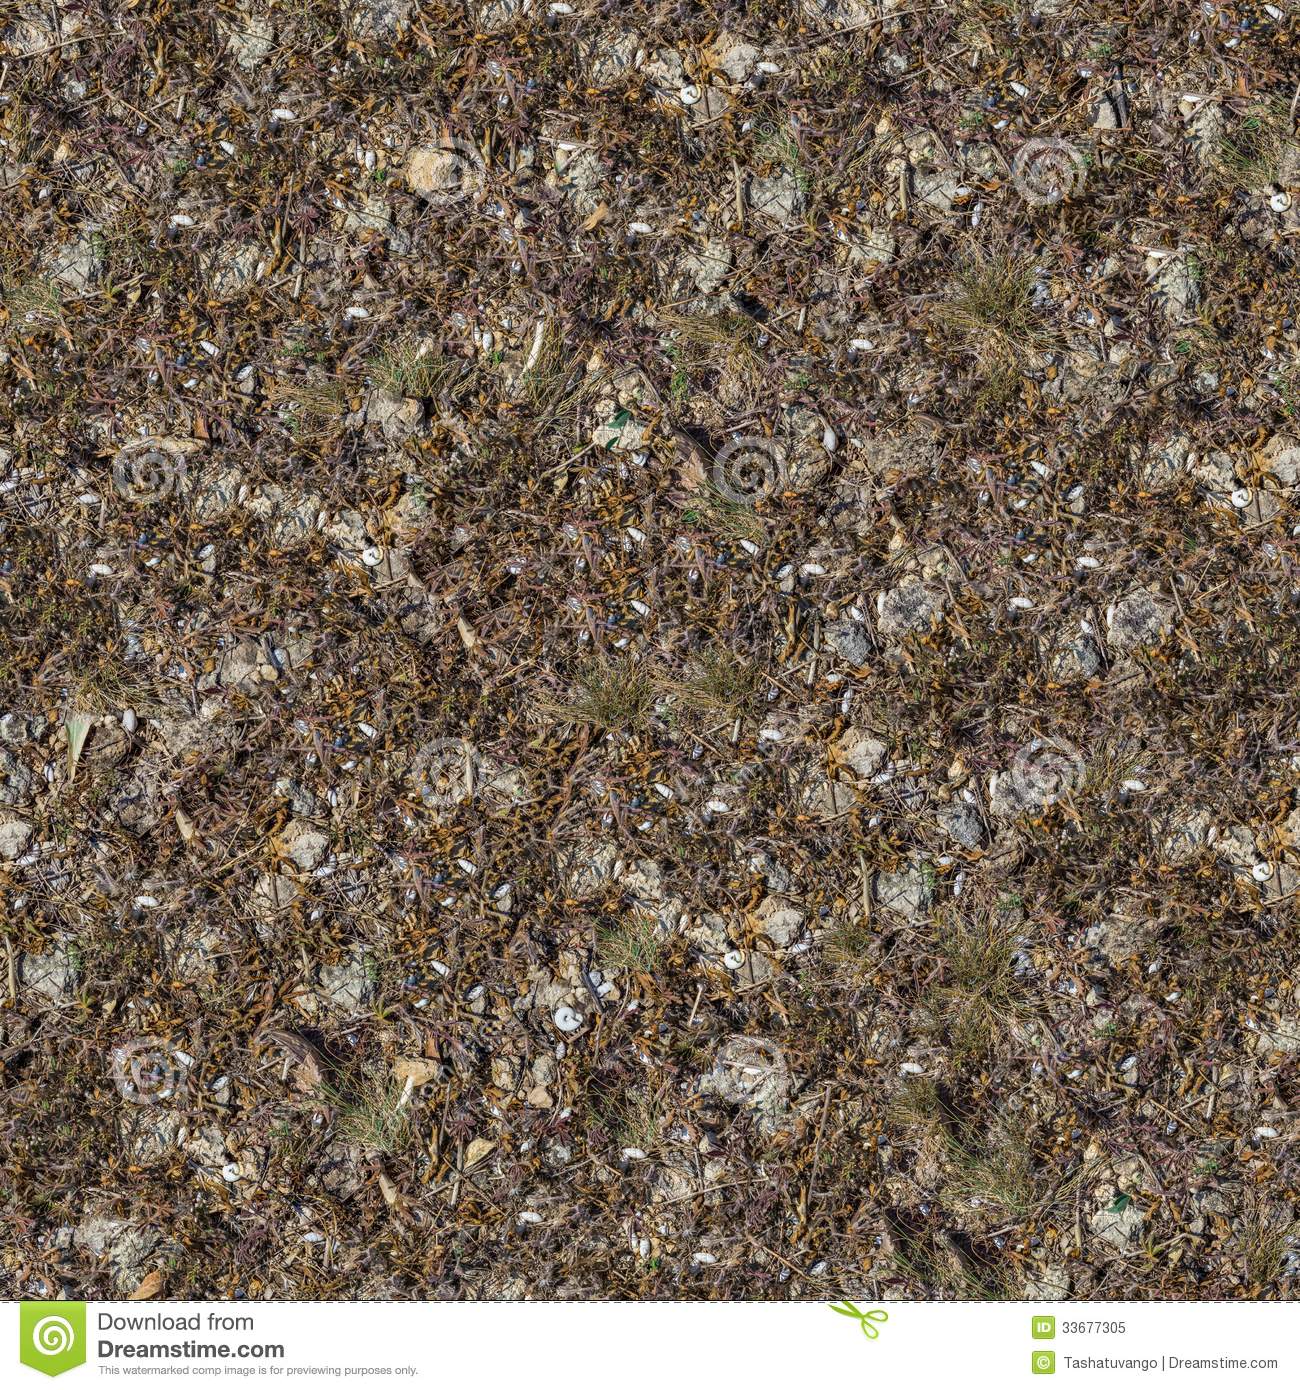 Seamless Texture Of Rocky Soil Covered With Withered Dry Grass Leaves